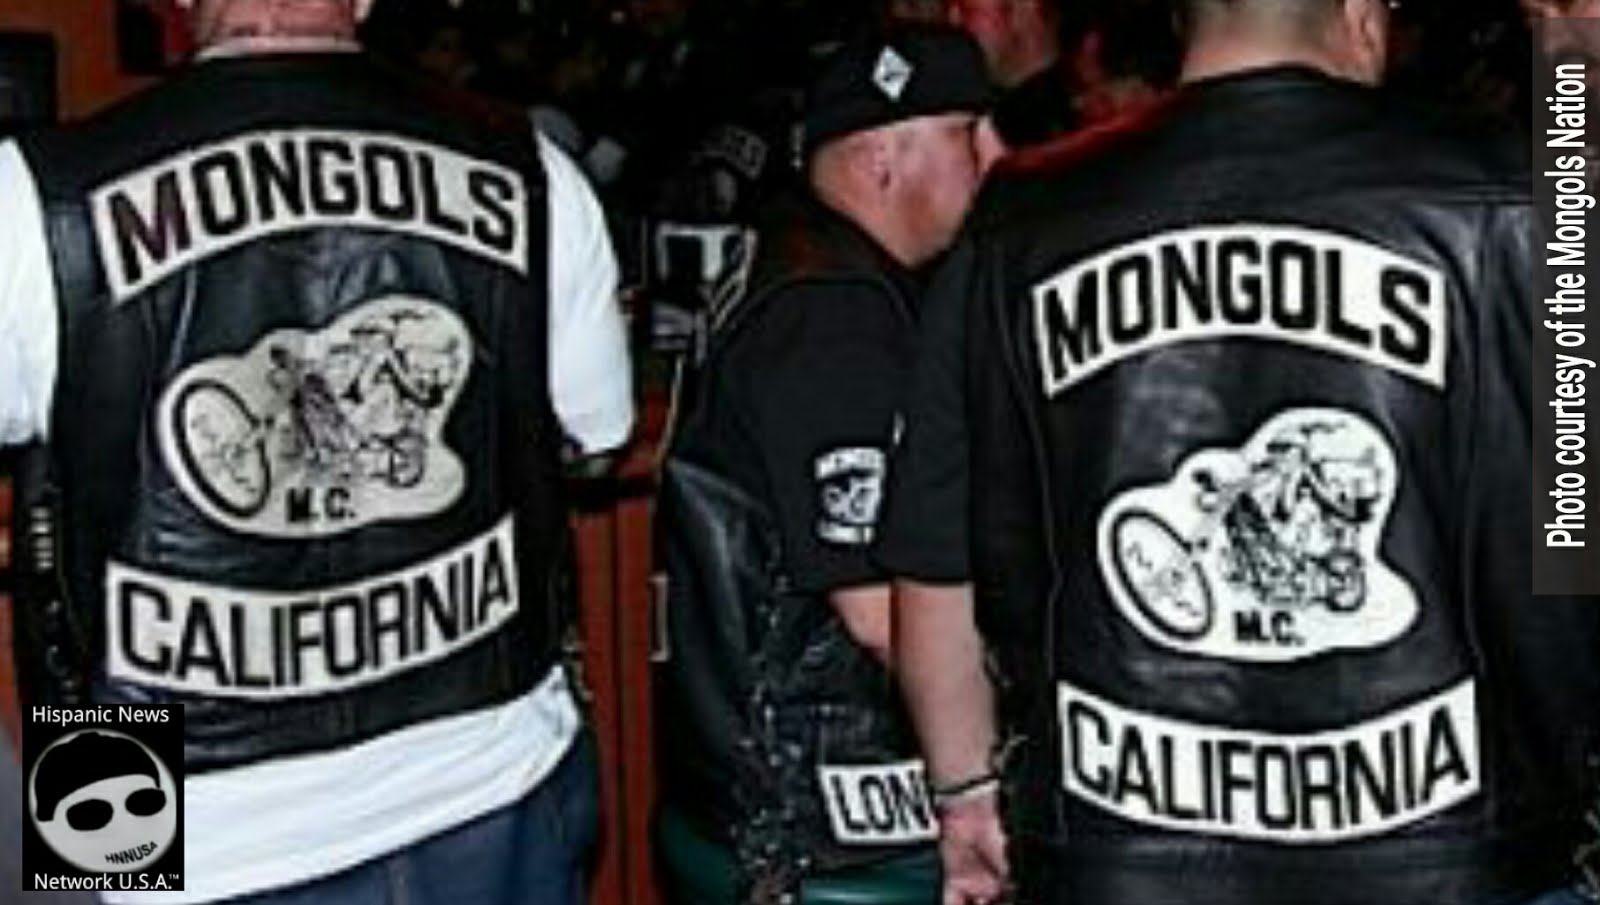 mongols mc patch over